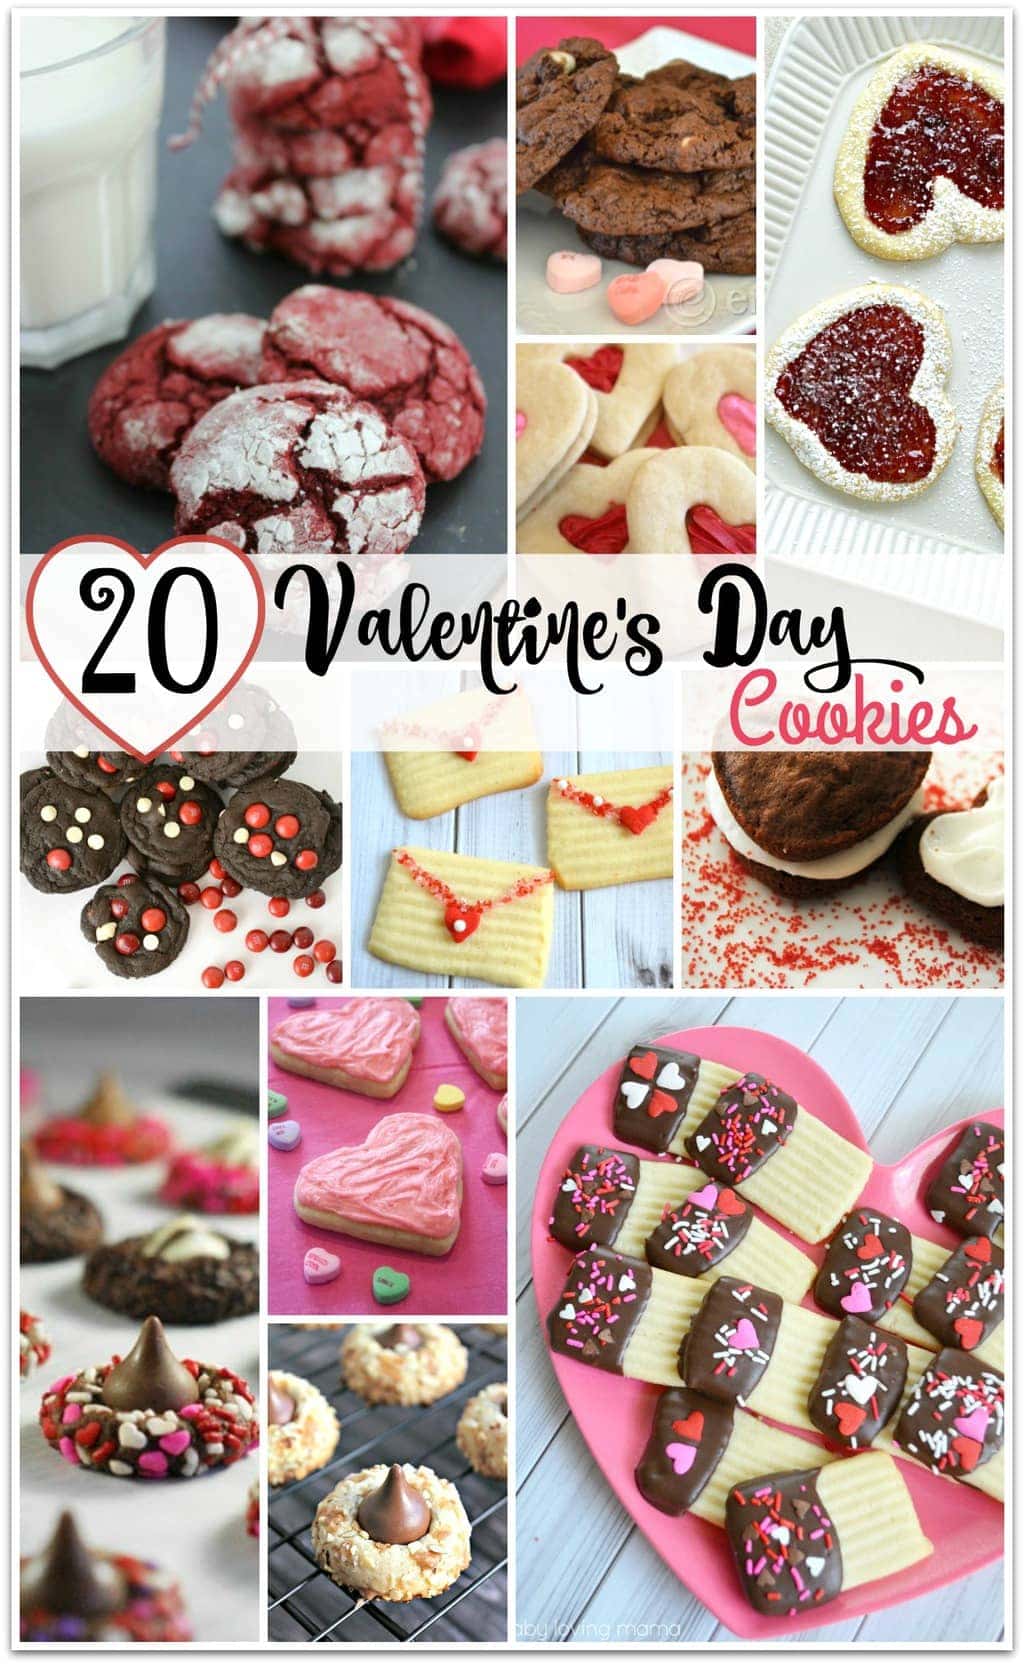 Thinking about bringing Valentine’s Day cookies to that party? Just want to make something special for your family? Right before Valentine’s Day, you’ll find a plethora of Valentine’s Day cookies at the store, but you can DIY with these fabulous recipes and they will taste SO much better! Gather the kids and head to the kitchen for some family time!